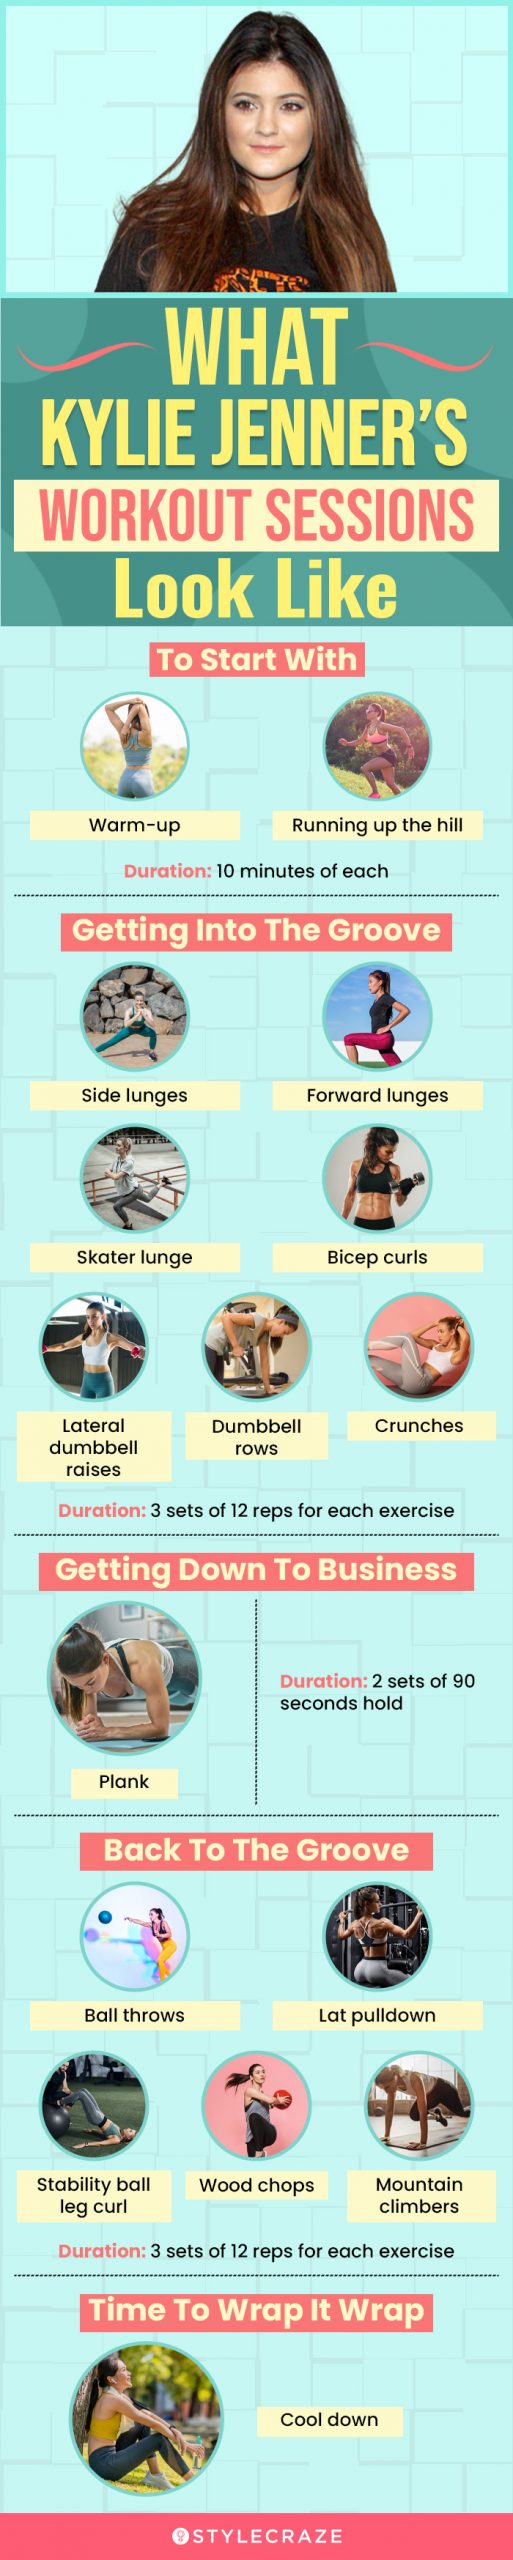 what kylie jenner’s workout sessions look like(infographic)